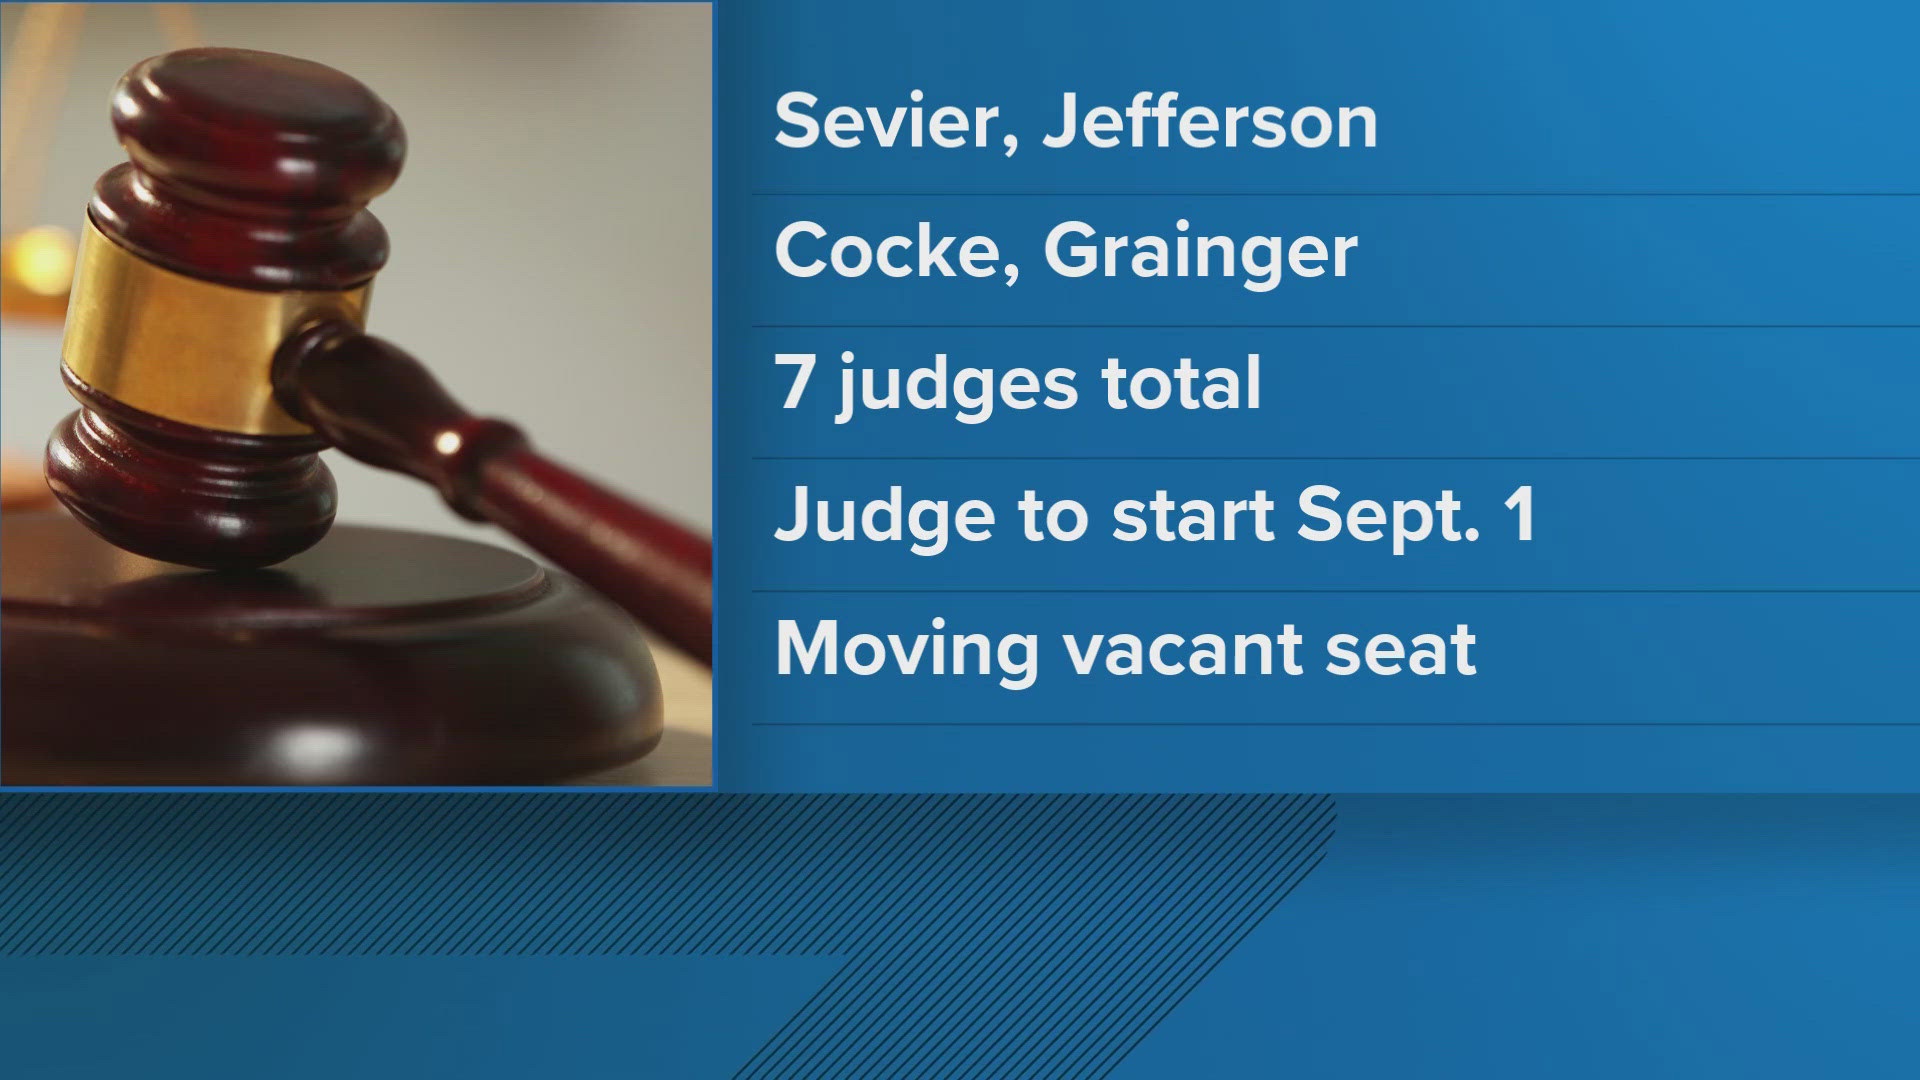 The state legislature approved money for another judge in the Fourth Judicial District, which covers Jefferson, Sevier, Cocke and Grainger counties.